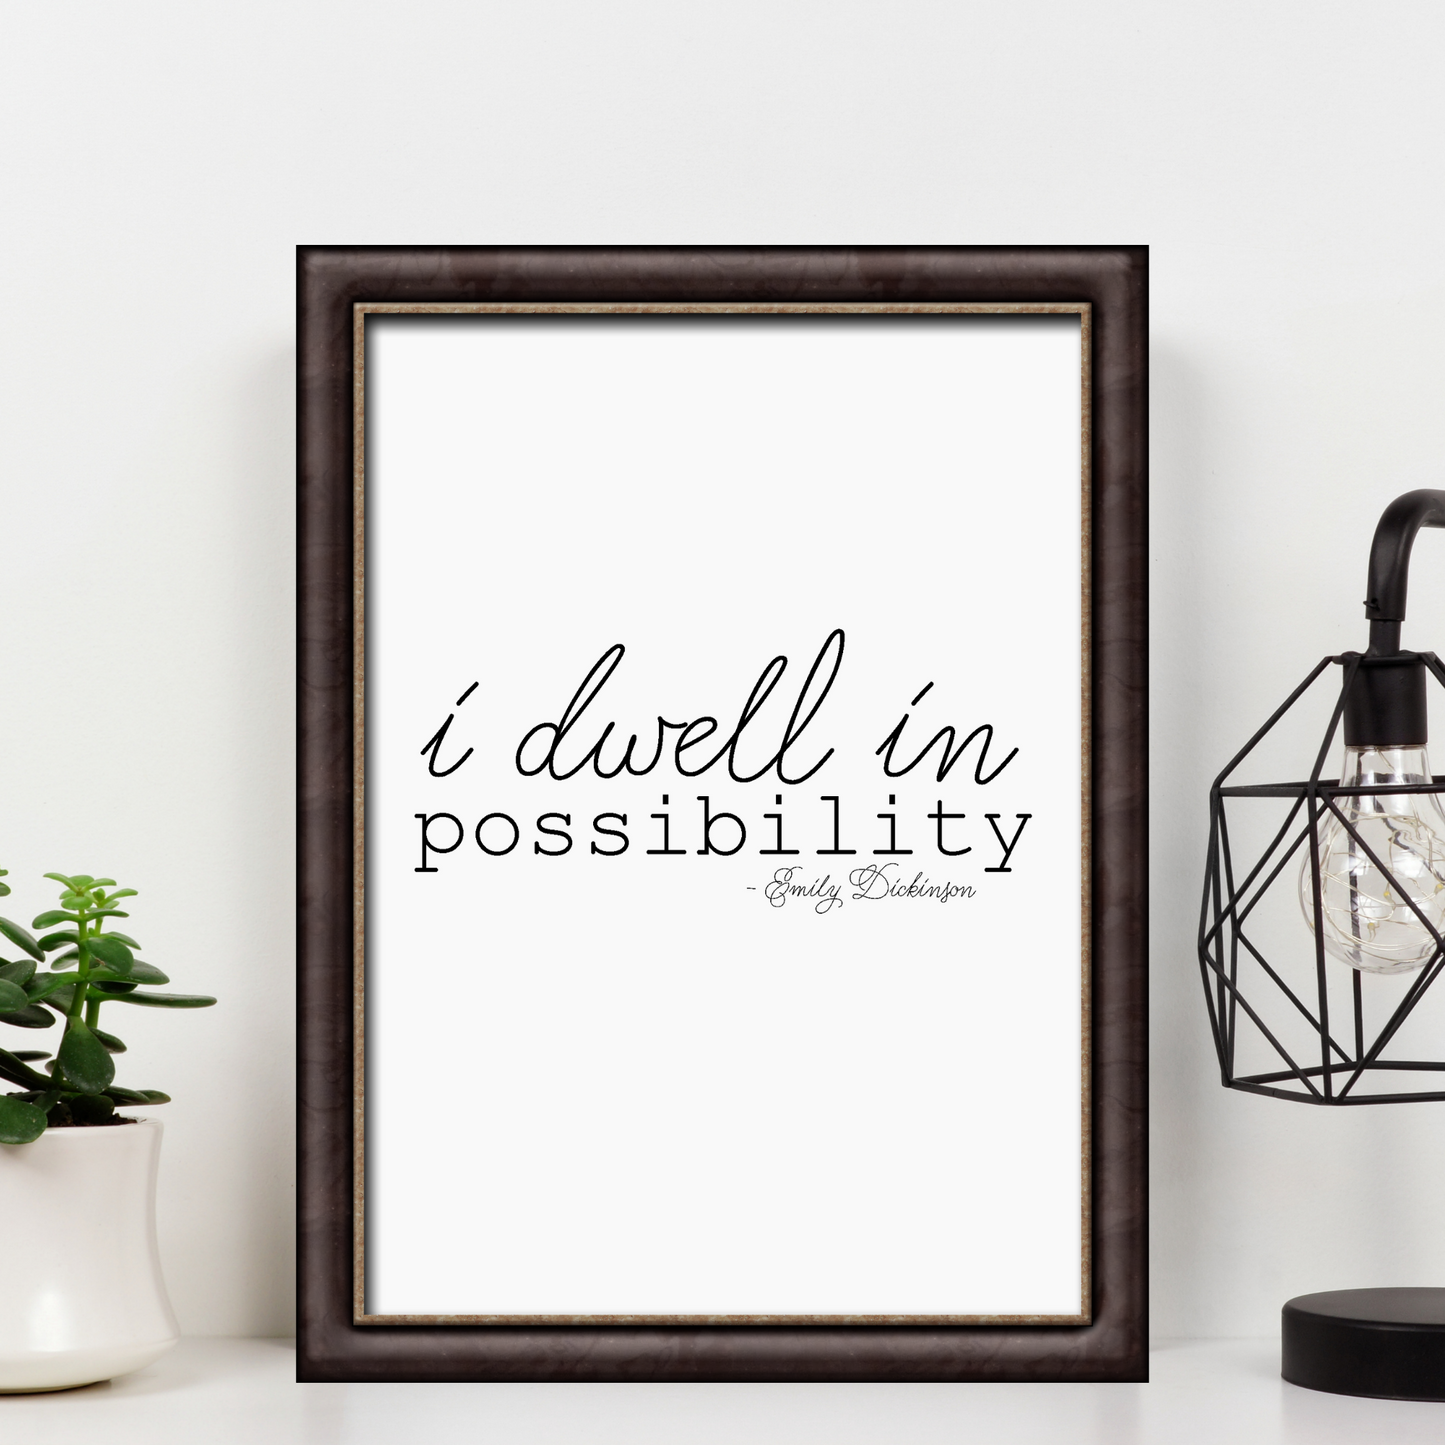 "I dwell in possibility" Quote by Emily Dickinson 8x10 Wall Art Black and White